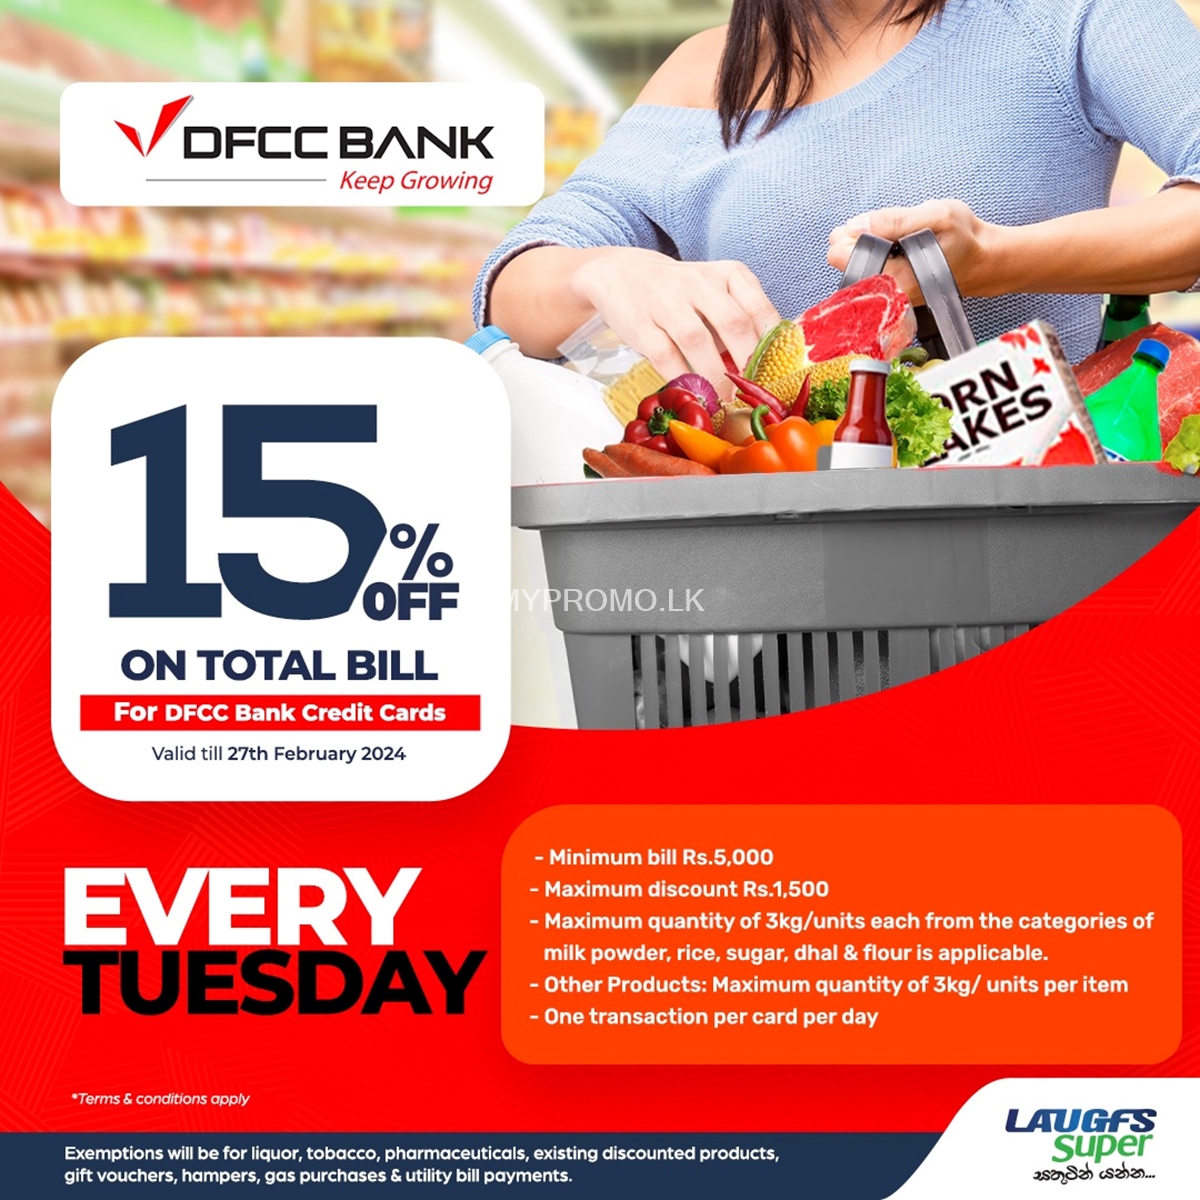 15% Off on Total Bill for DFCC Bank Credit Cards at LAUGFS Supermarket